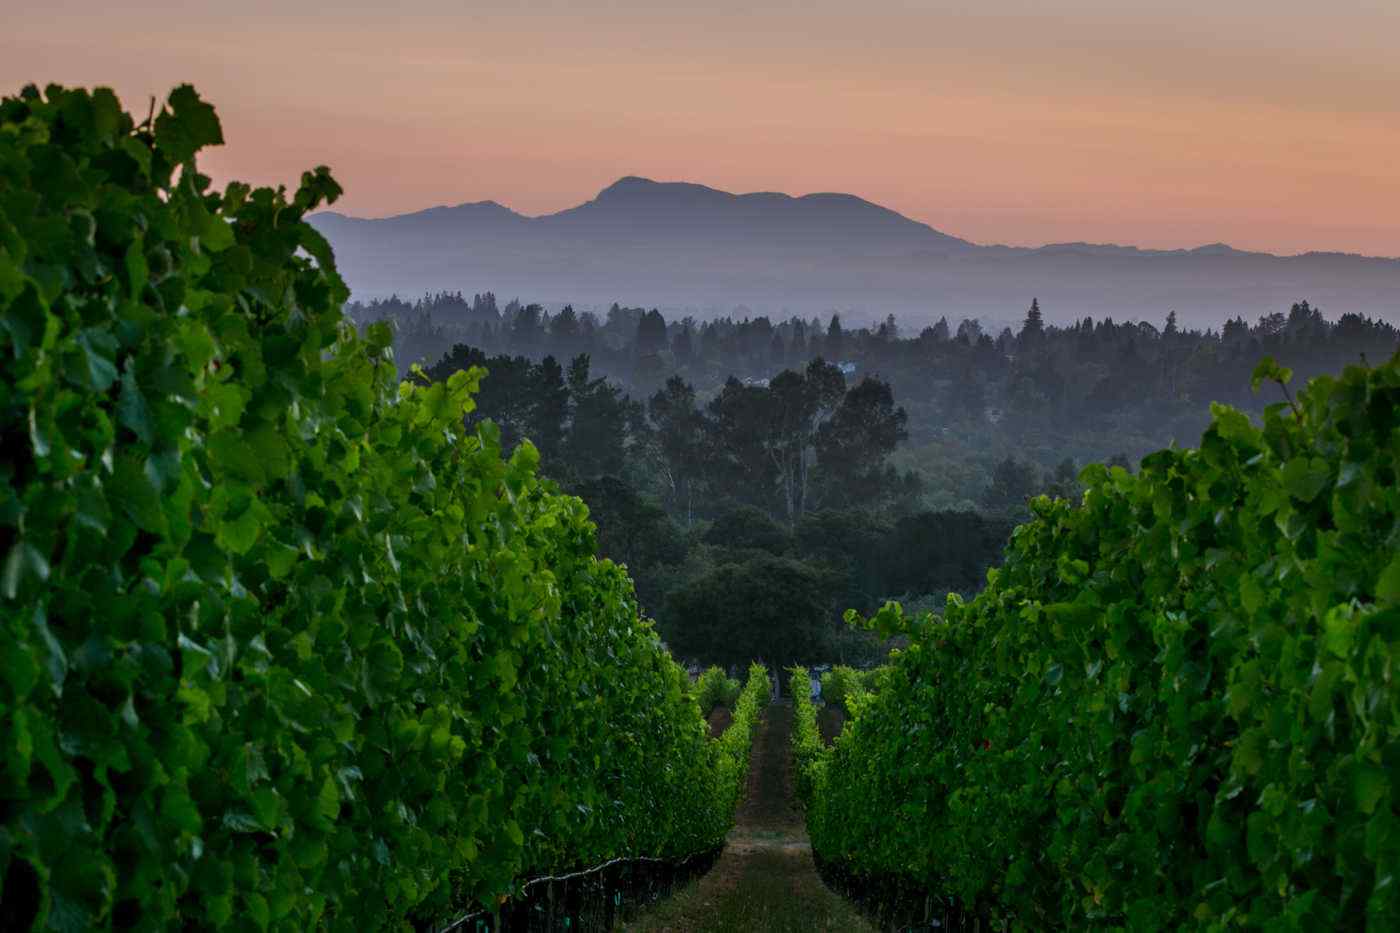 Bondi Home Ranch Vineyards – Spring Time downhill with trees and mountain views